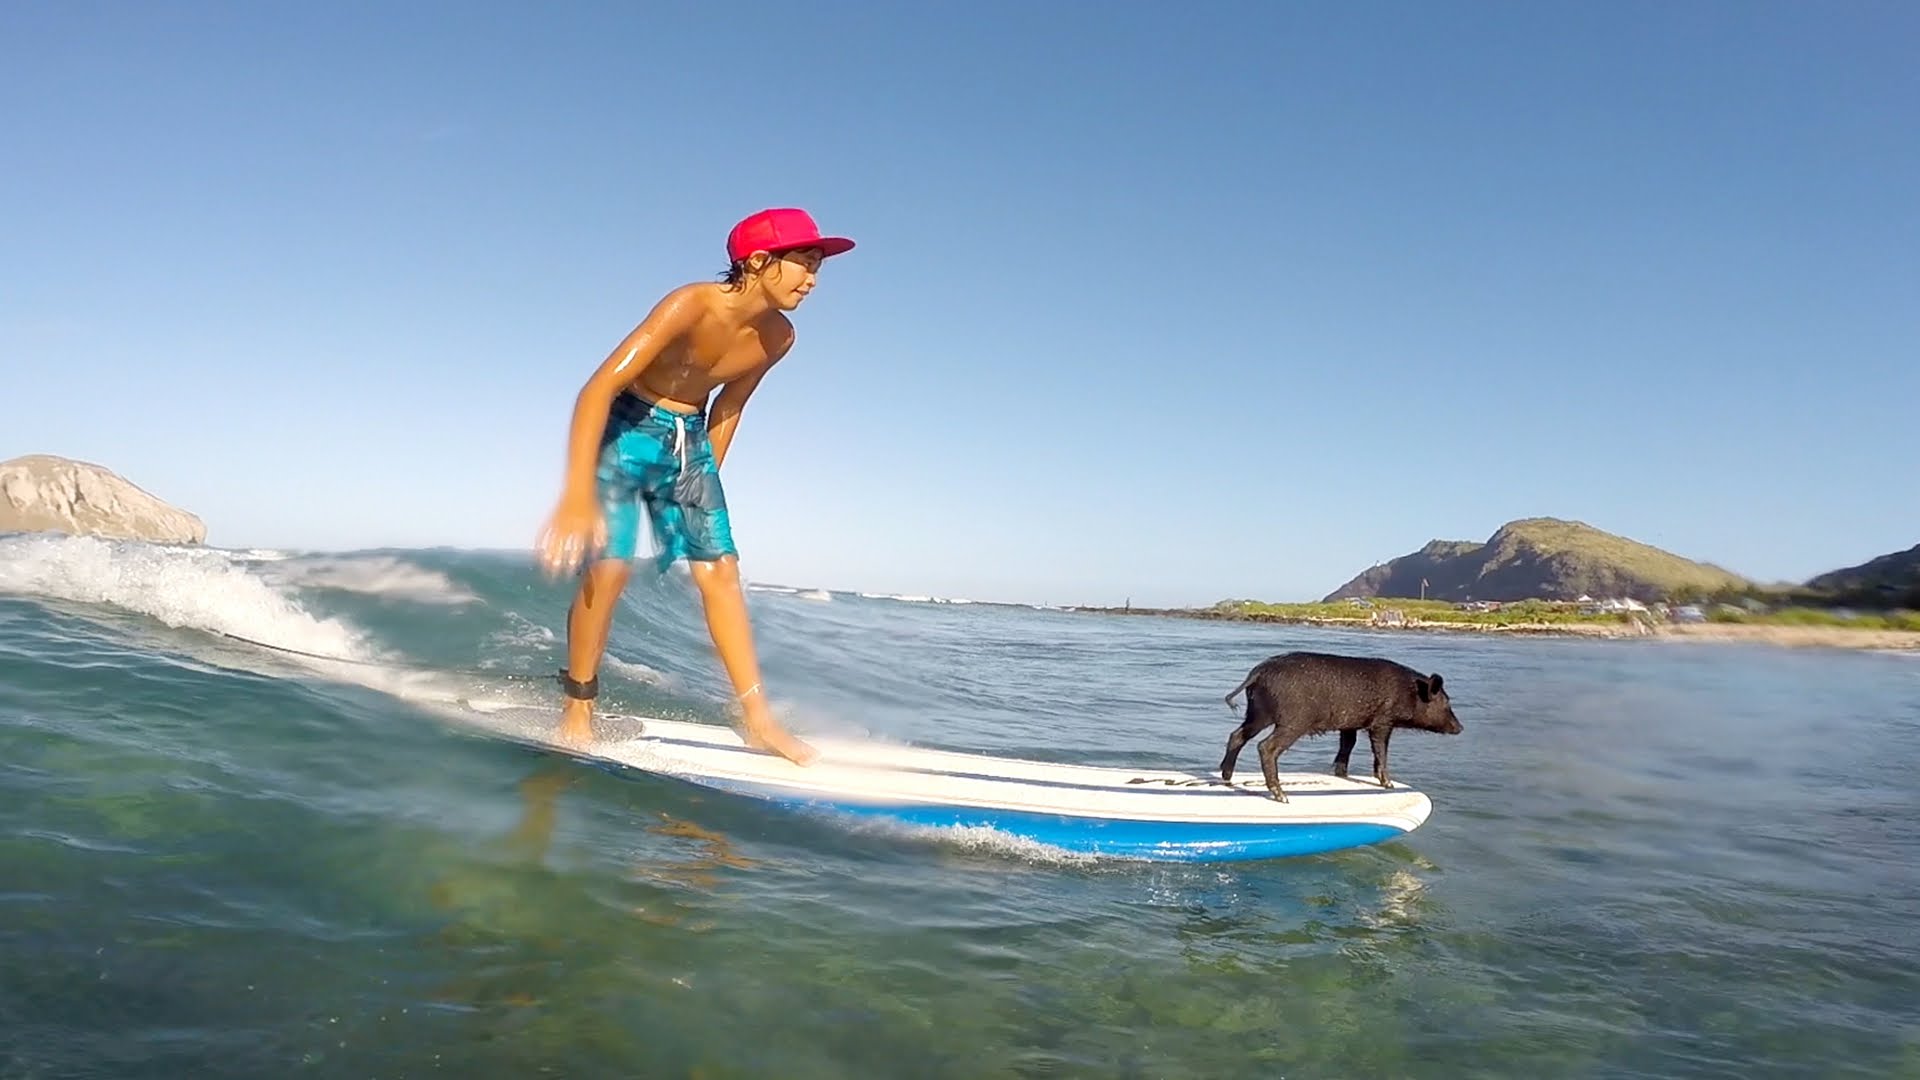 GoPro: Baby Pig Goes Surfing in Hawaii - YouTube